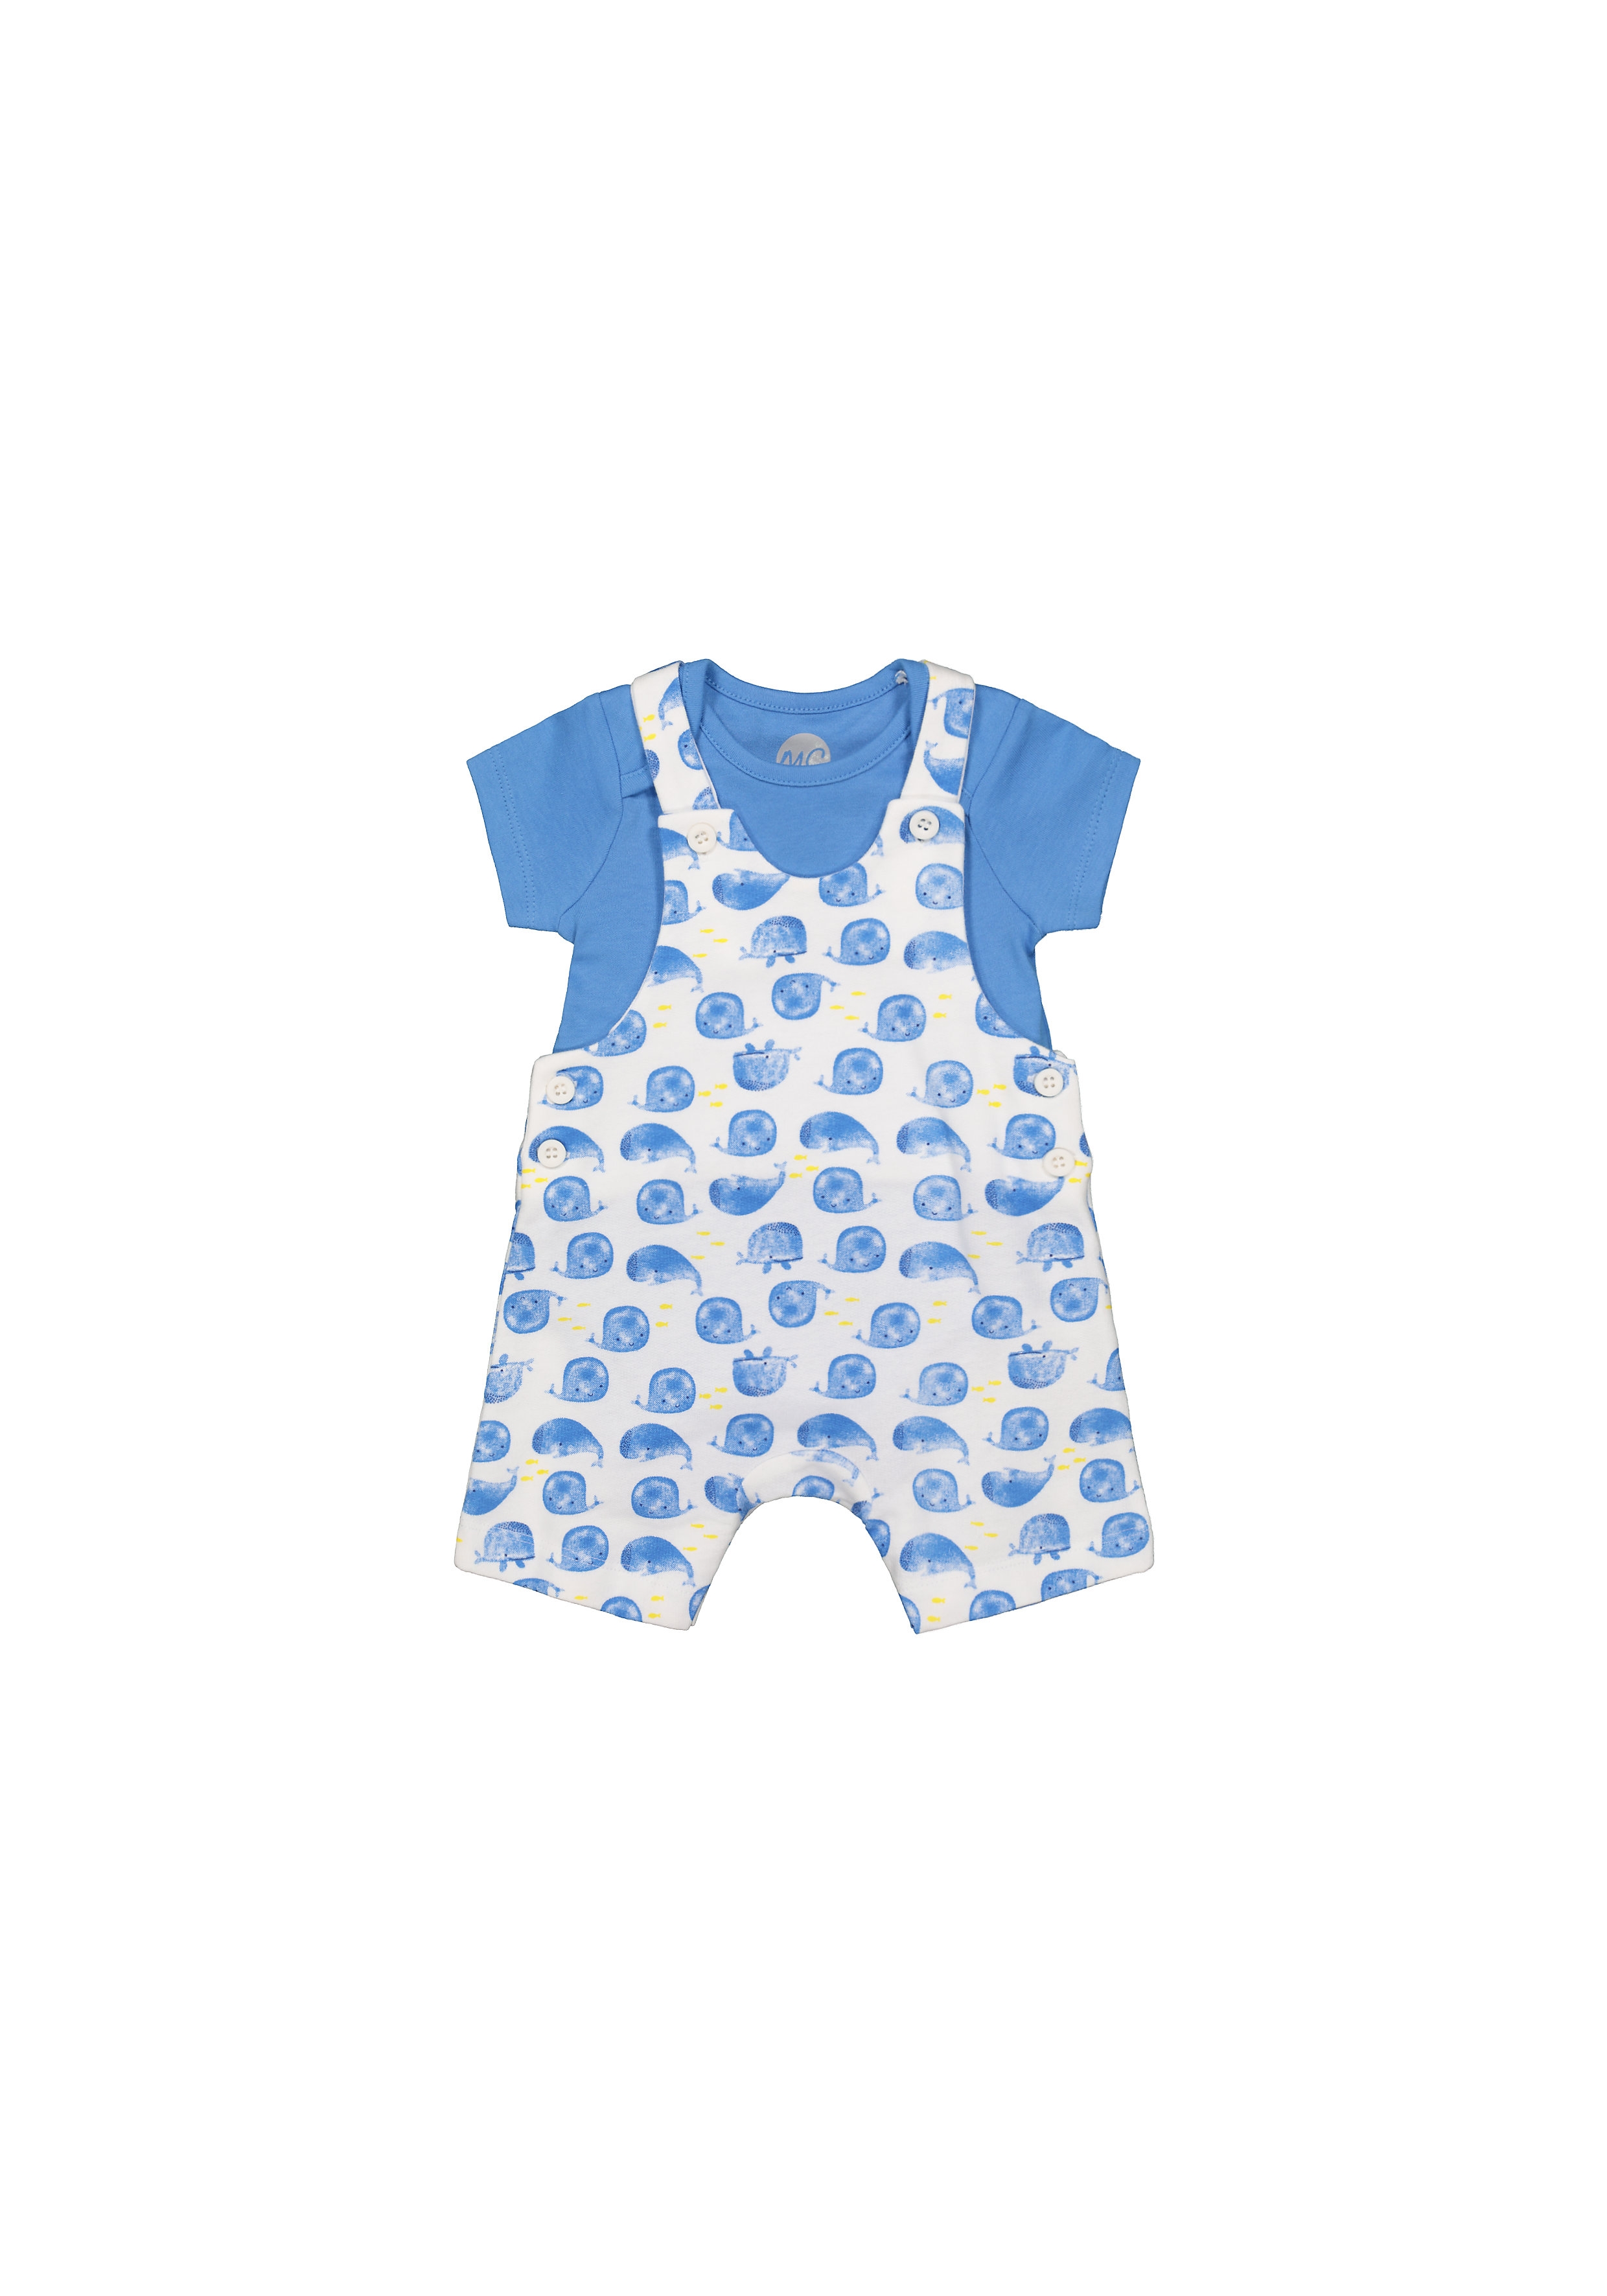 Mothercare | Boys Half Sleeves Dungaree Set Whale Print - Blue White